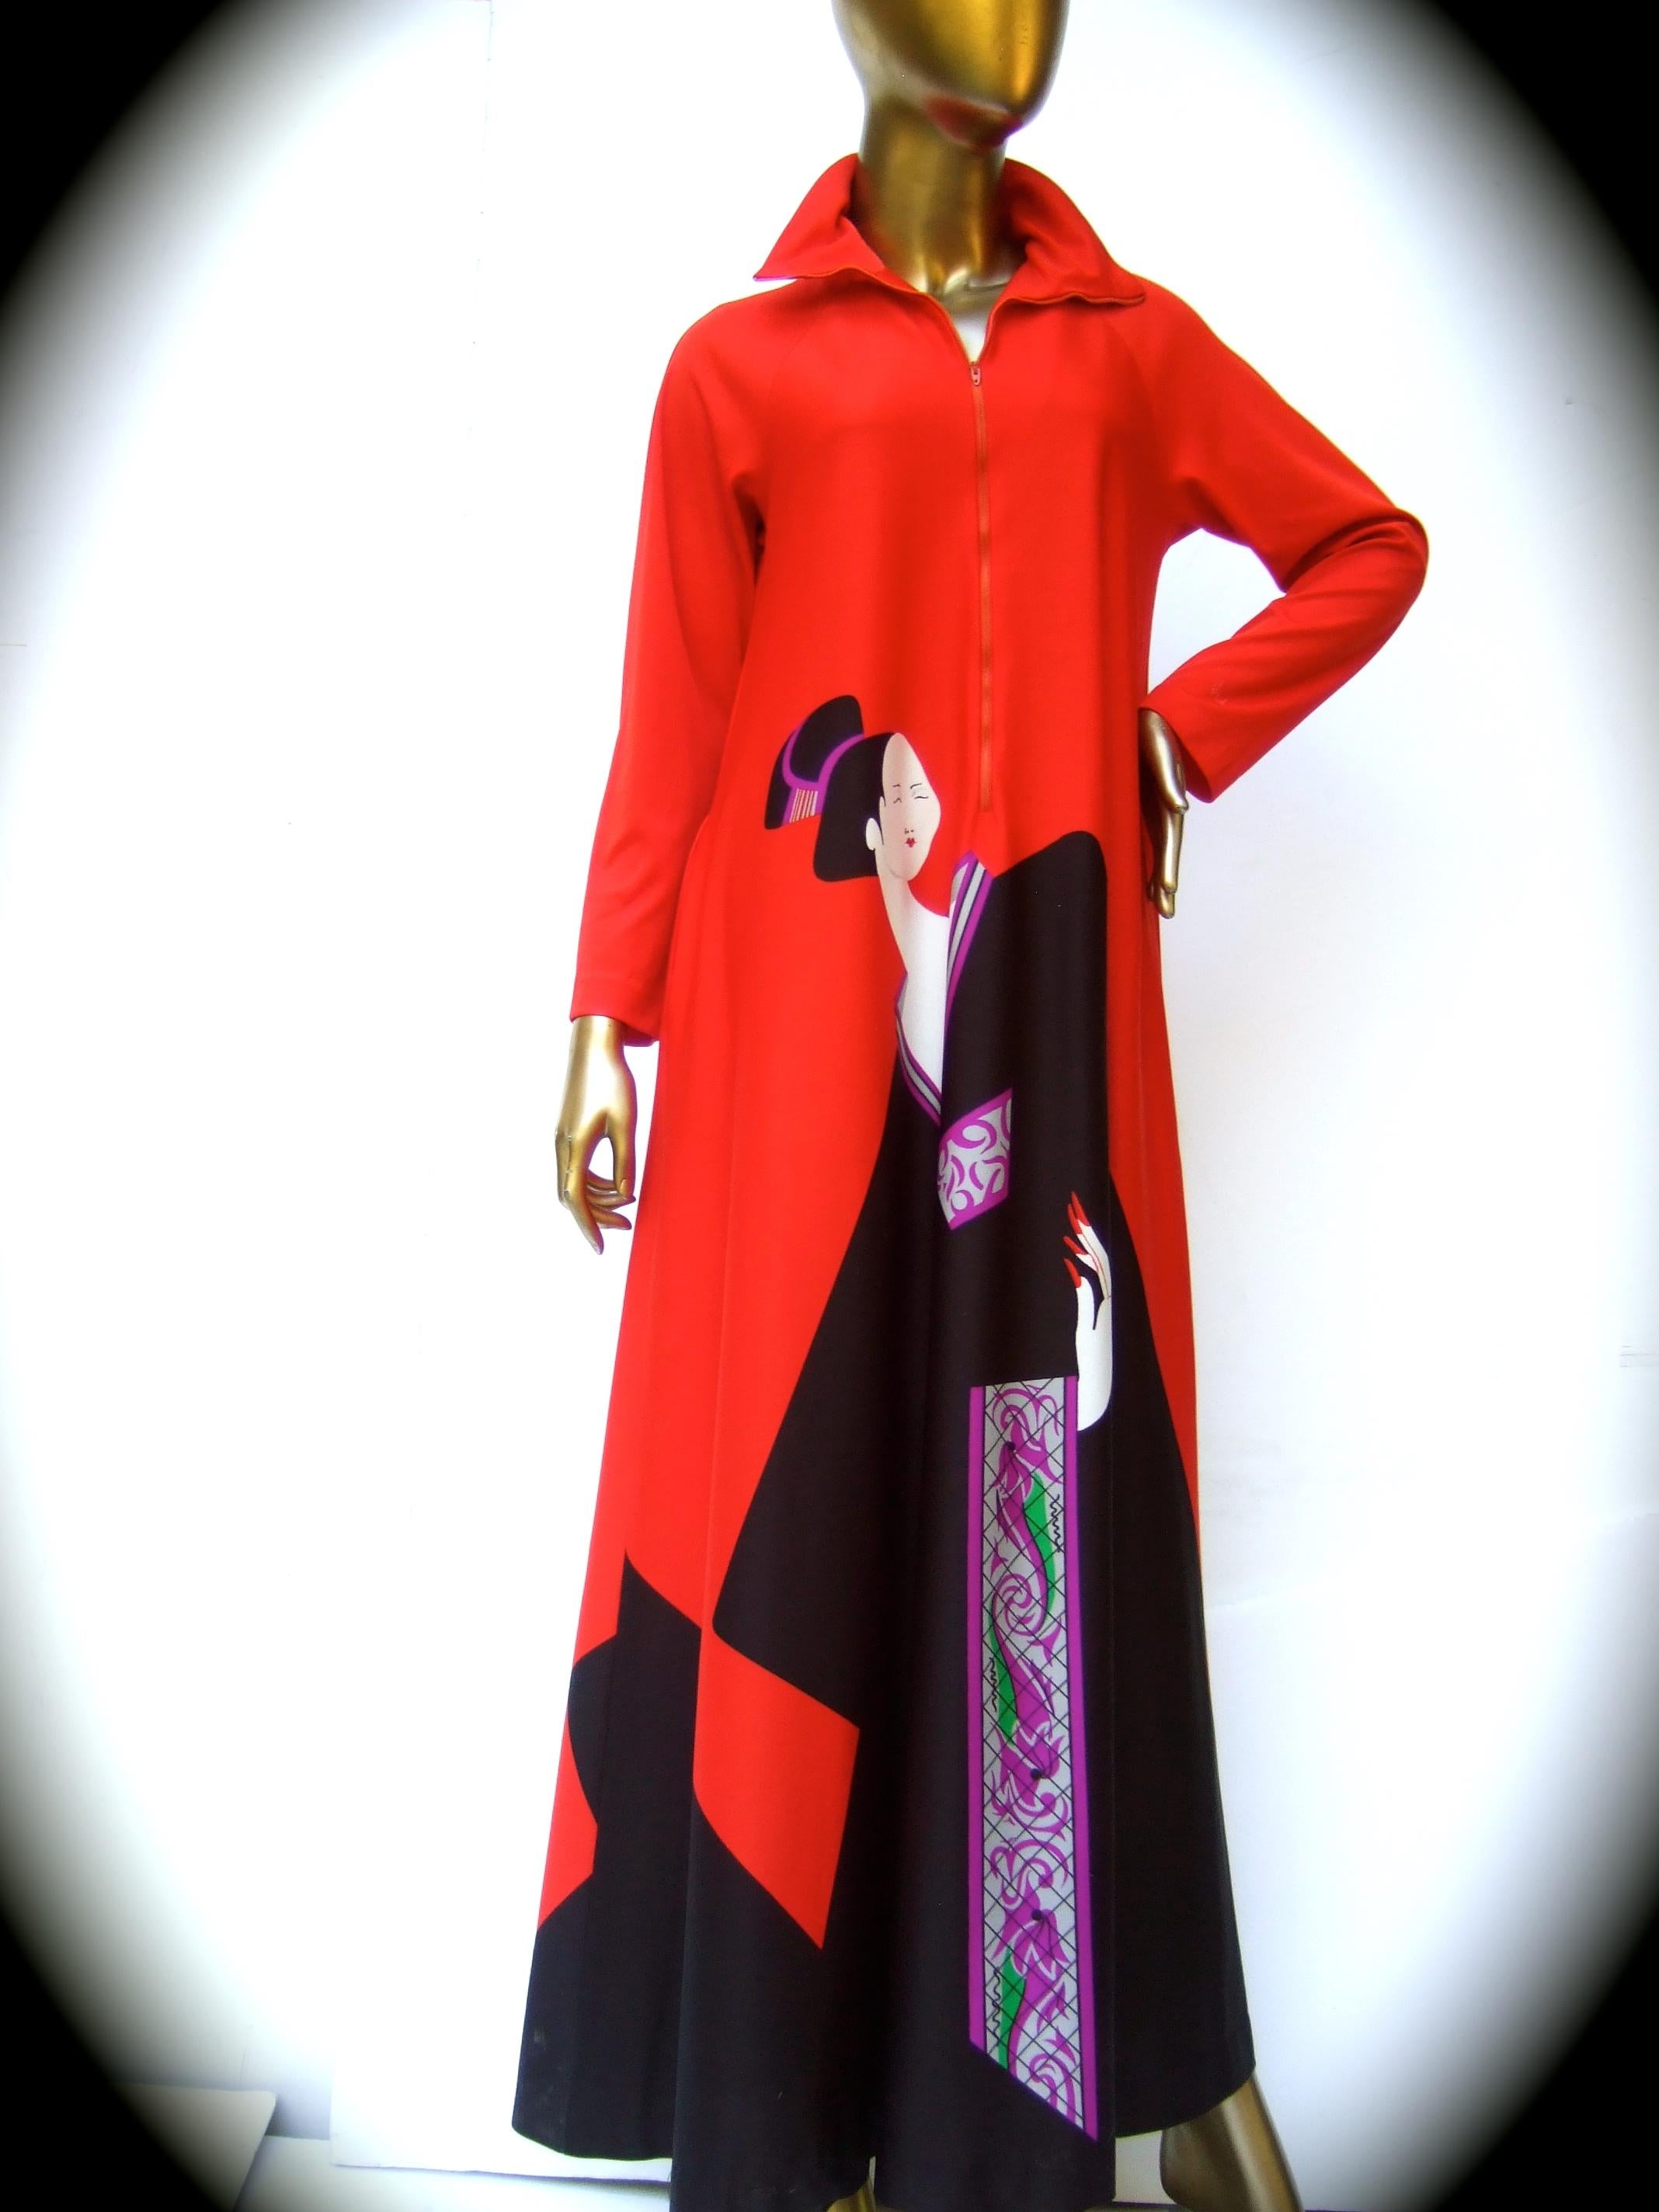 David Brown for Saks Fifth Avenue Bold graphic print poly knit patio lounge gown c 1970s
The stylish poly knit gown is illustrated with Japanese style woman on both 
the front & back sides 

The poly knit lounge gown partially zippers up the center